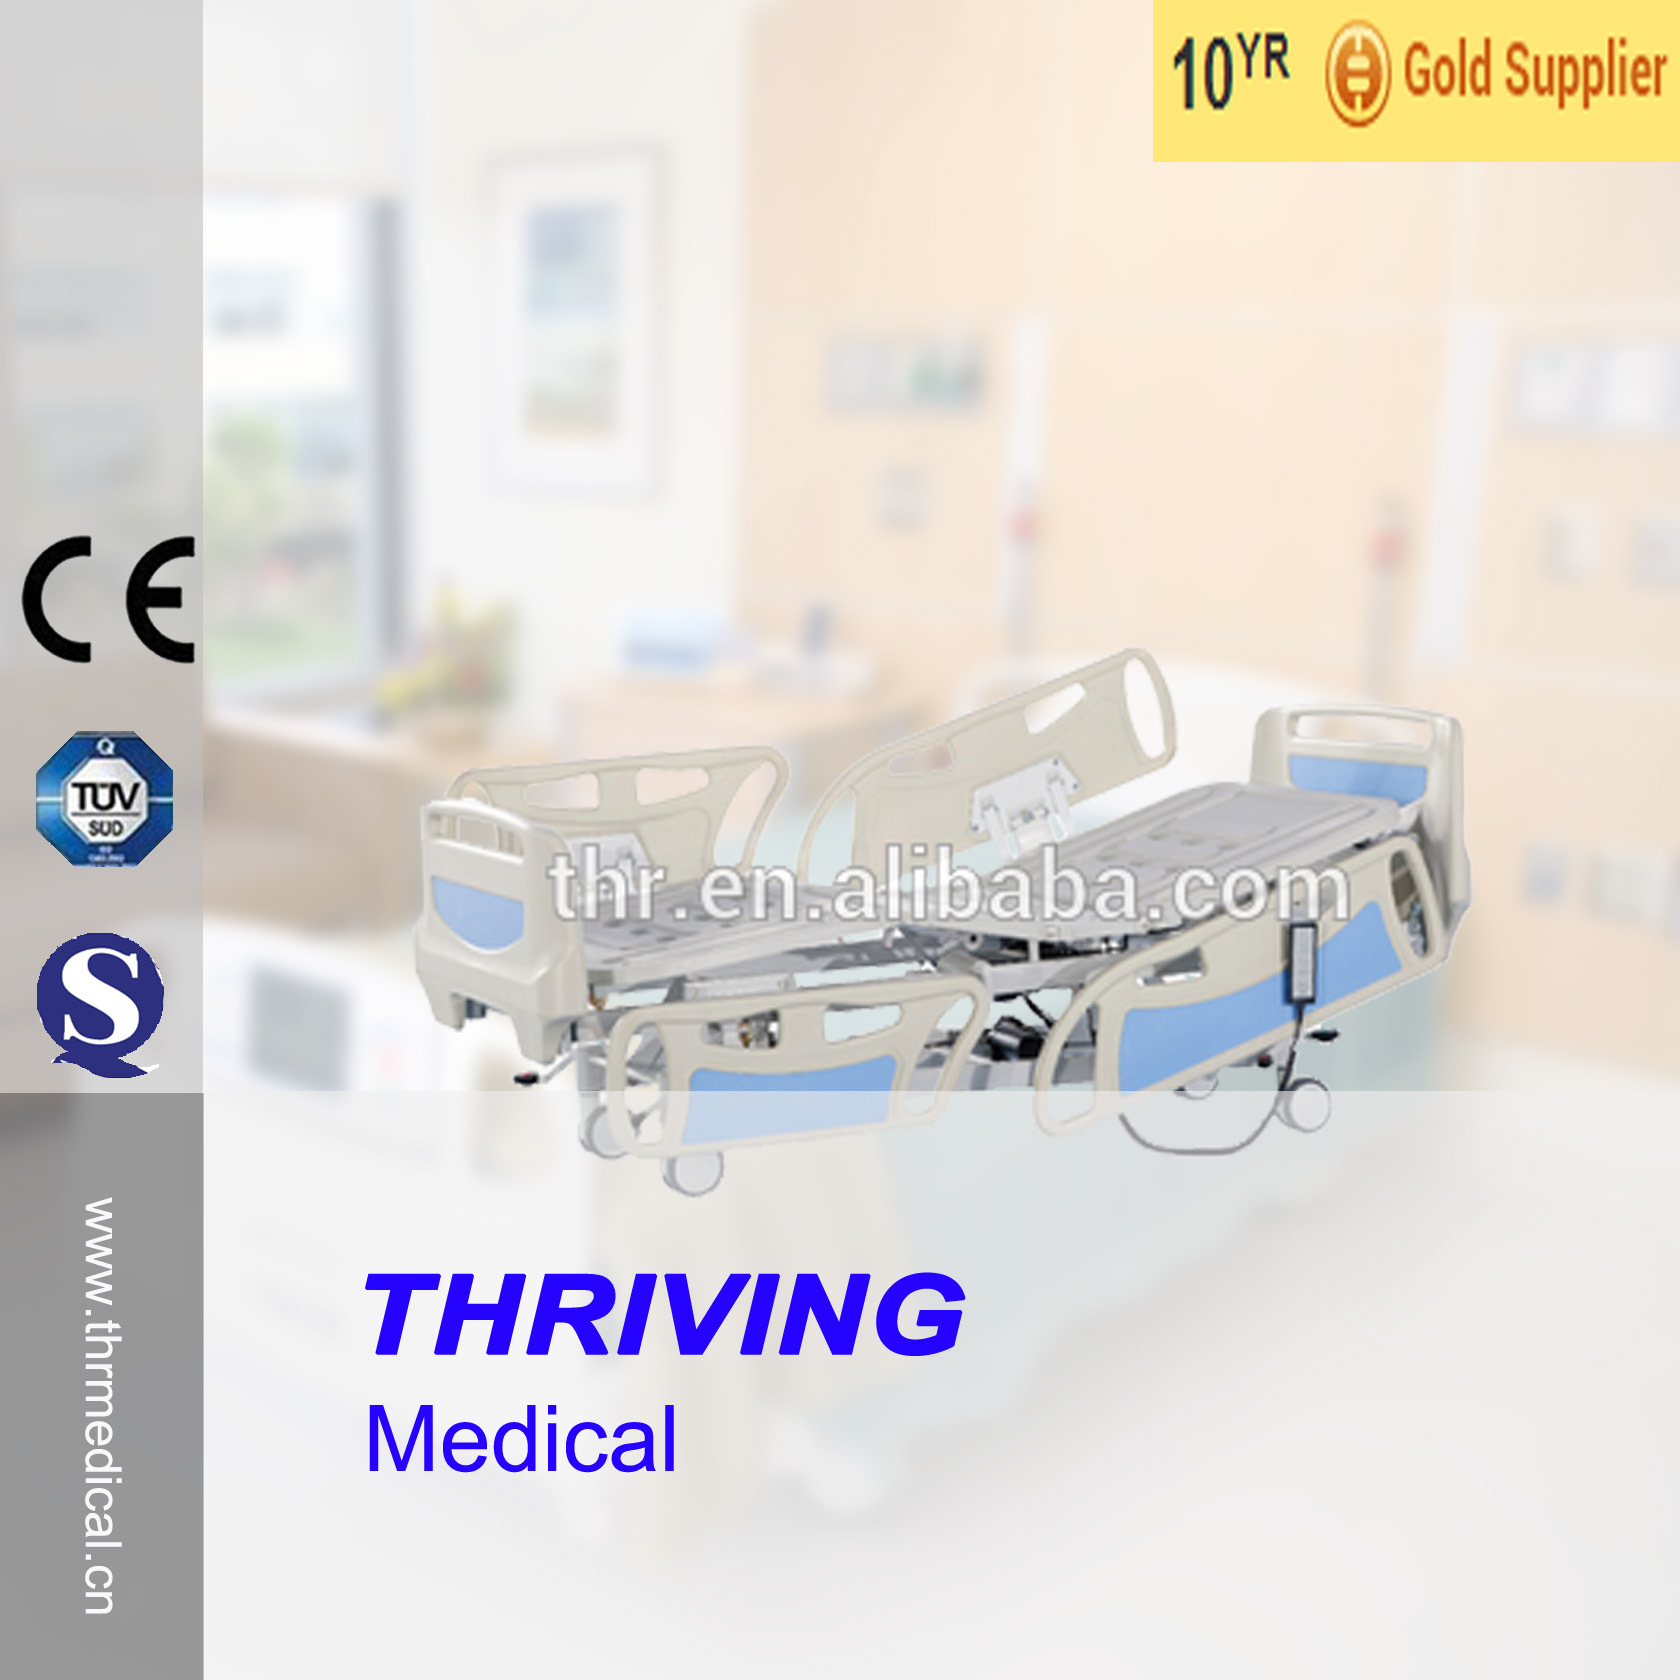 Thr-Eb368 Medical Electric 3-Function Bed with Wheel